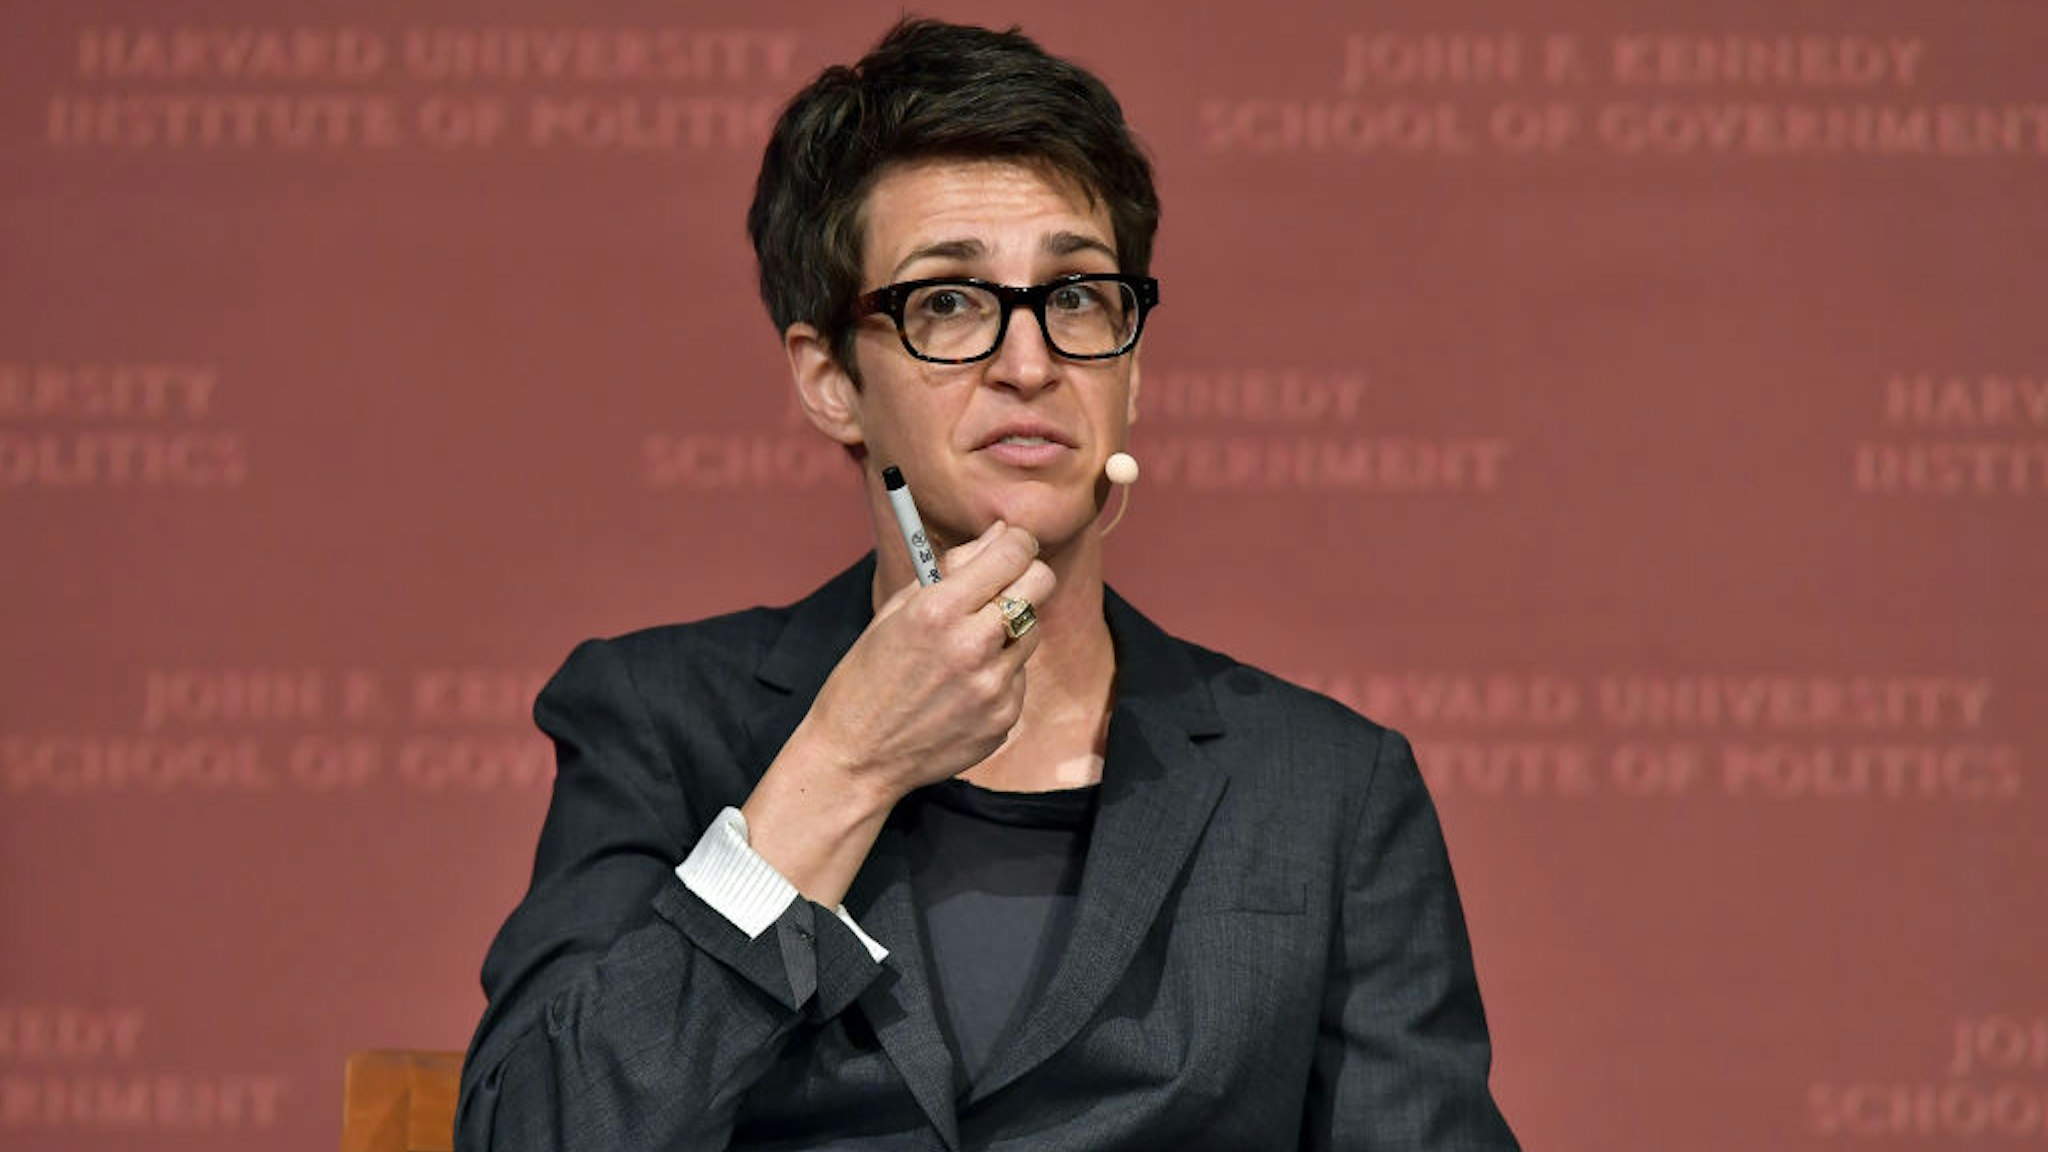 Rachel Maddow speaks at the Harvard University John F. Kennedy Jr. Forum in a program titled "Perspectives on National Security" moderated by Rachel Maddow on October 16, 2017 in Cambridge, Massachusetts.